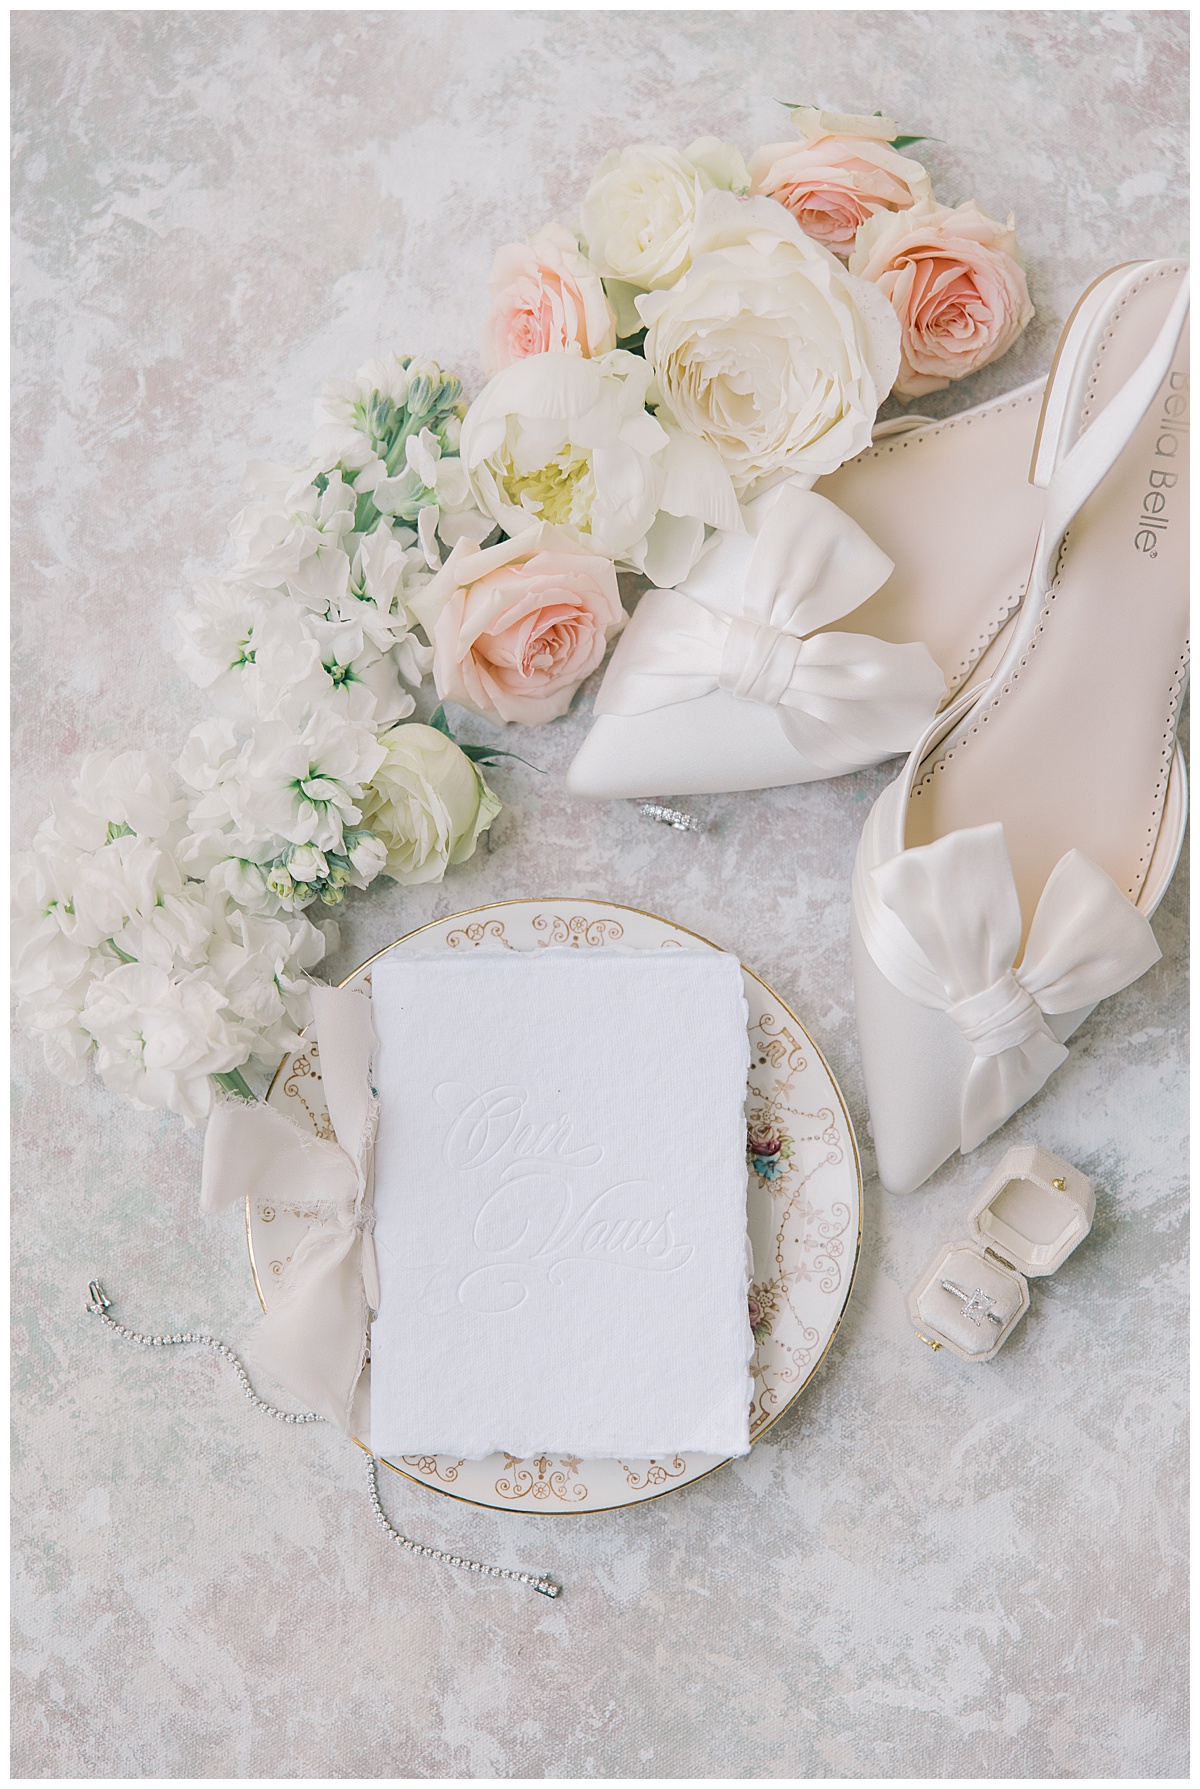 vow book on antique plate with white + pink roses. 